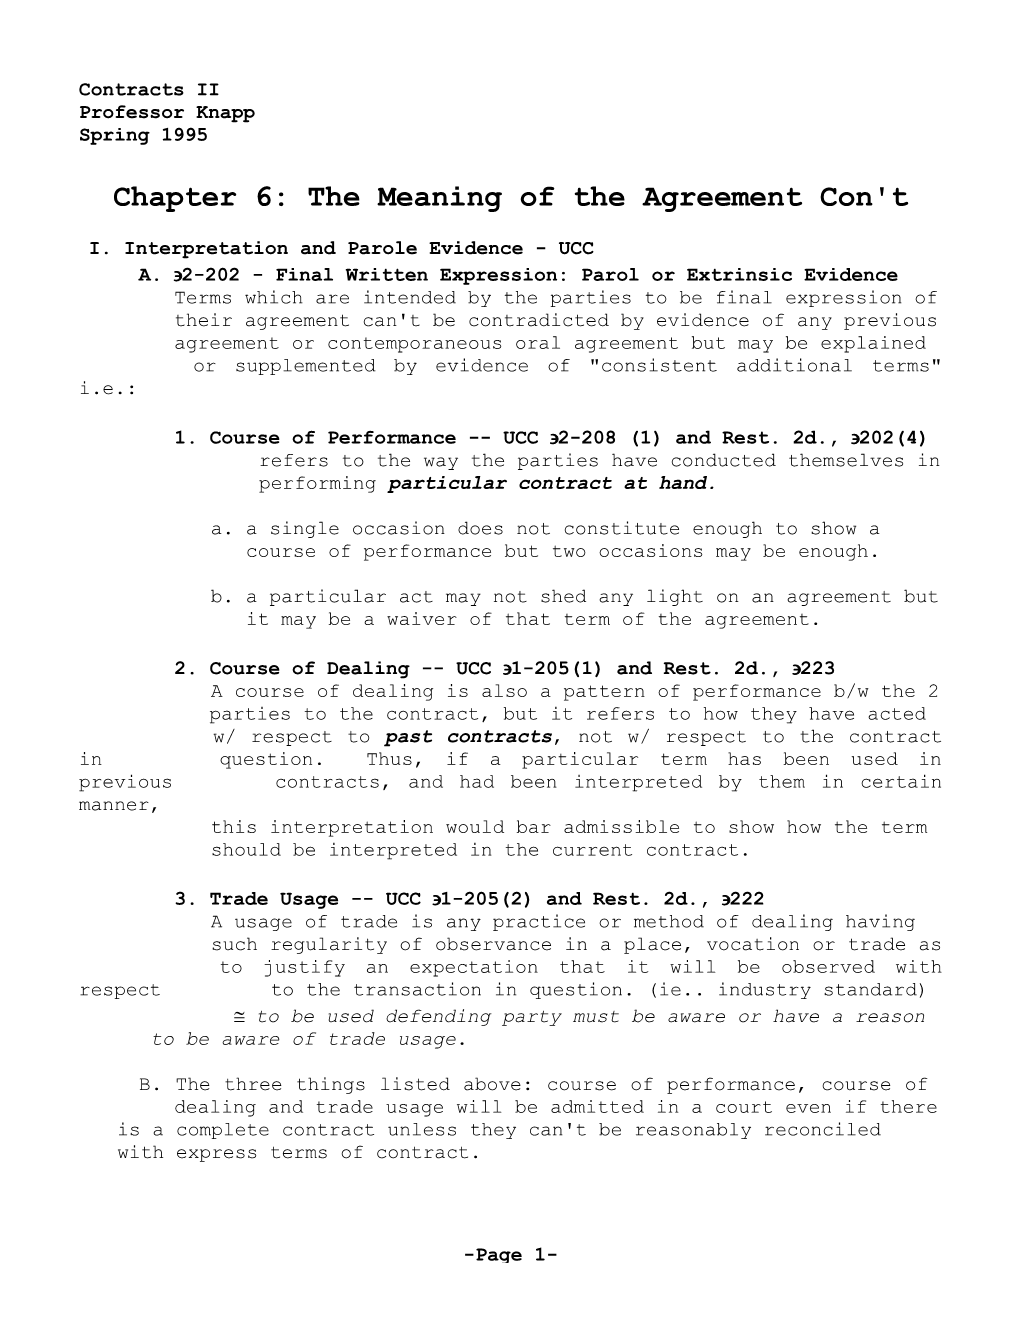 Chapter 6: the Meaning of the Agreement Con't